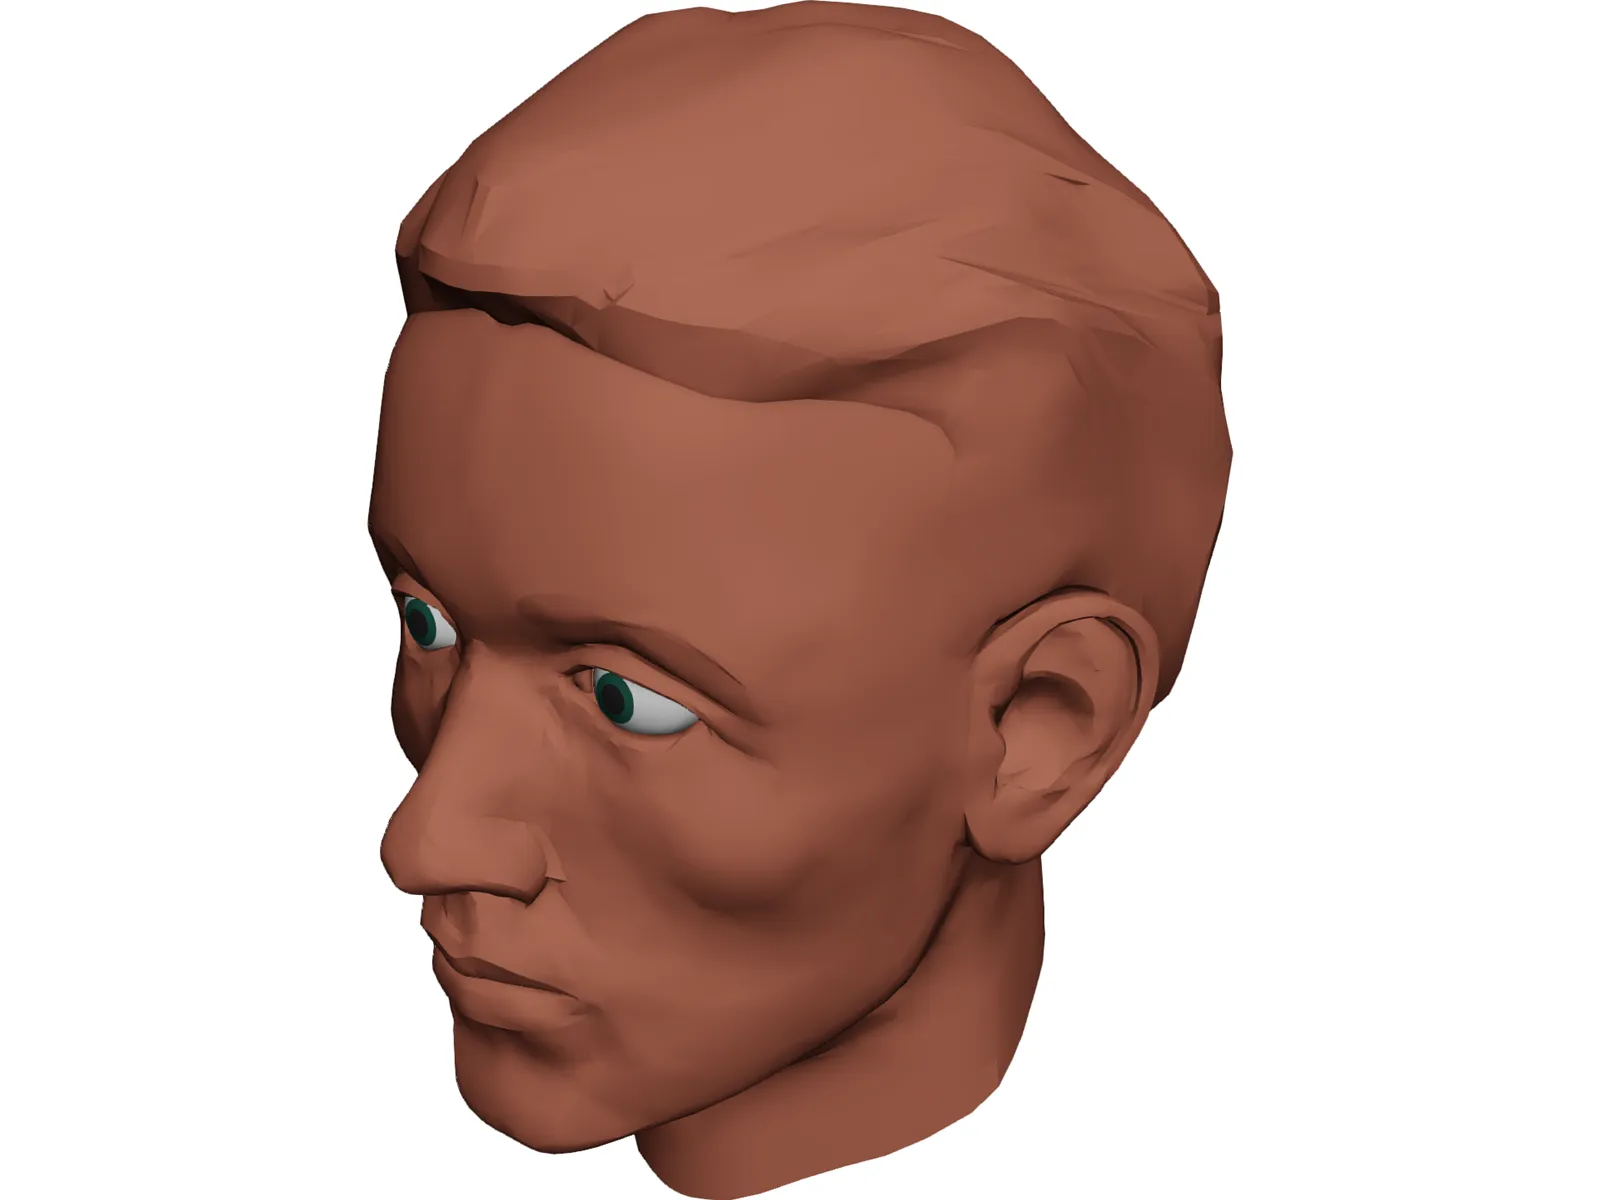 Face Muscles and Head 3D Model